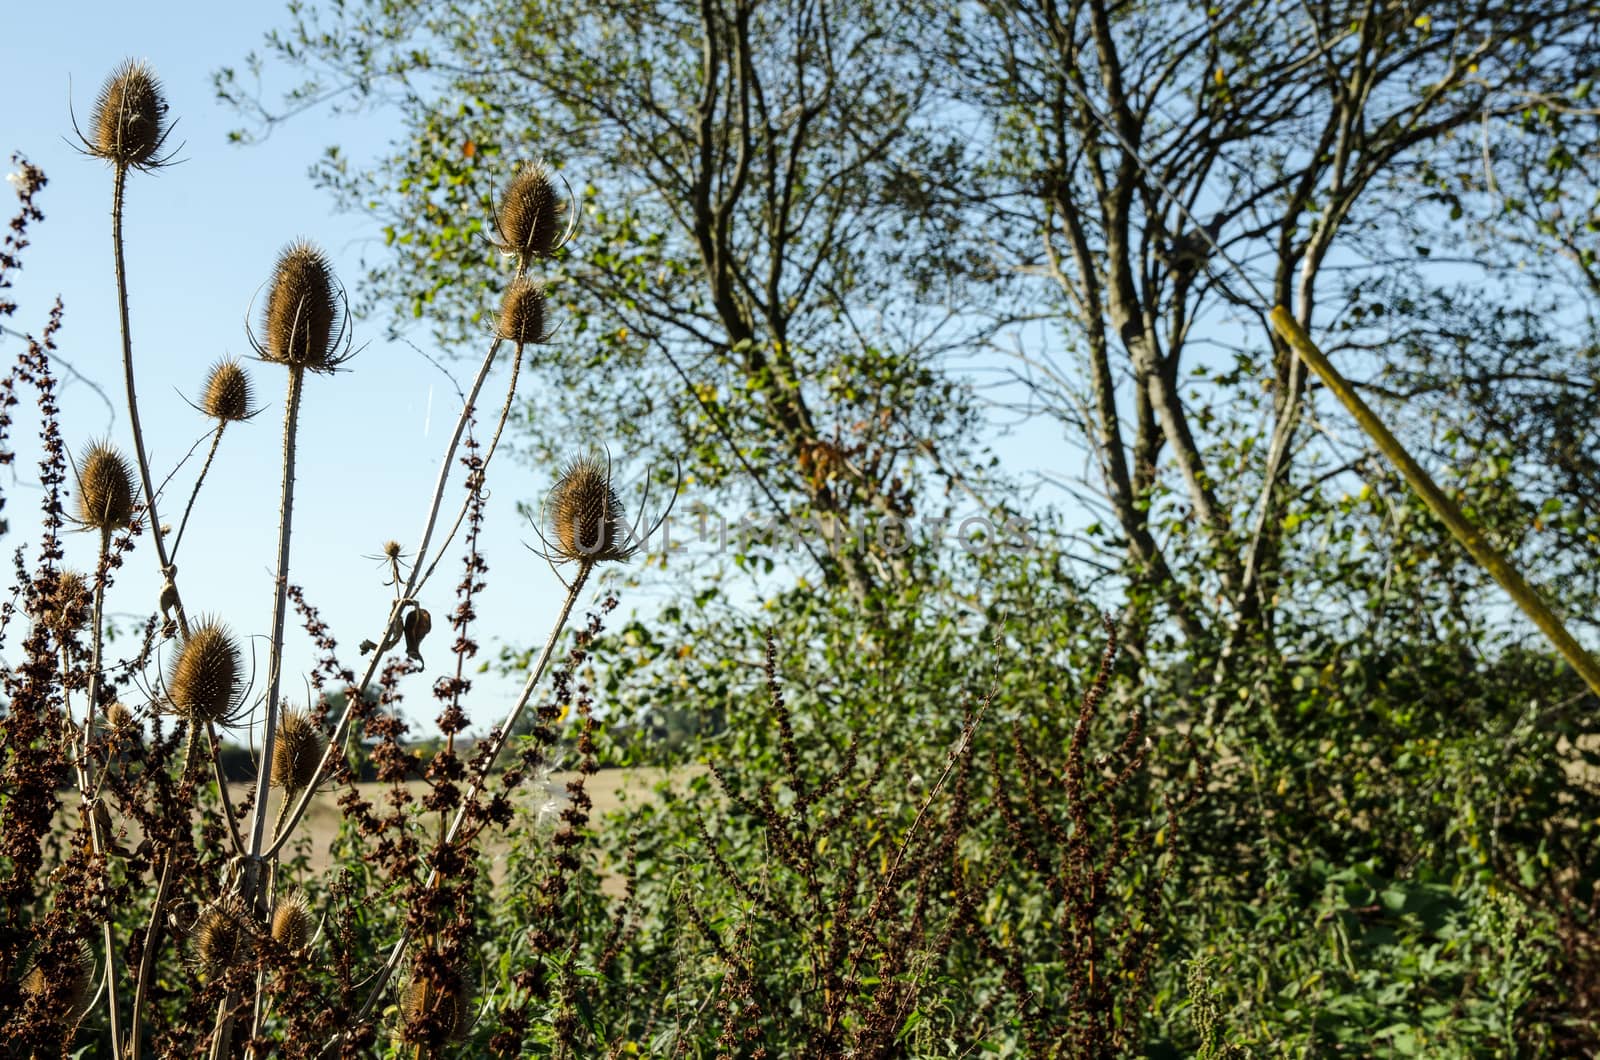 Teasels in Hedgerow by BasPhoto